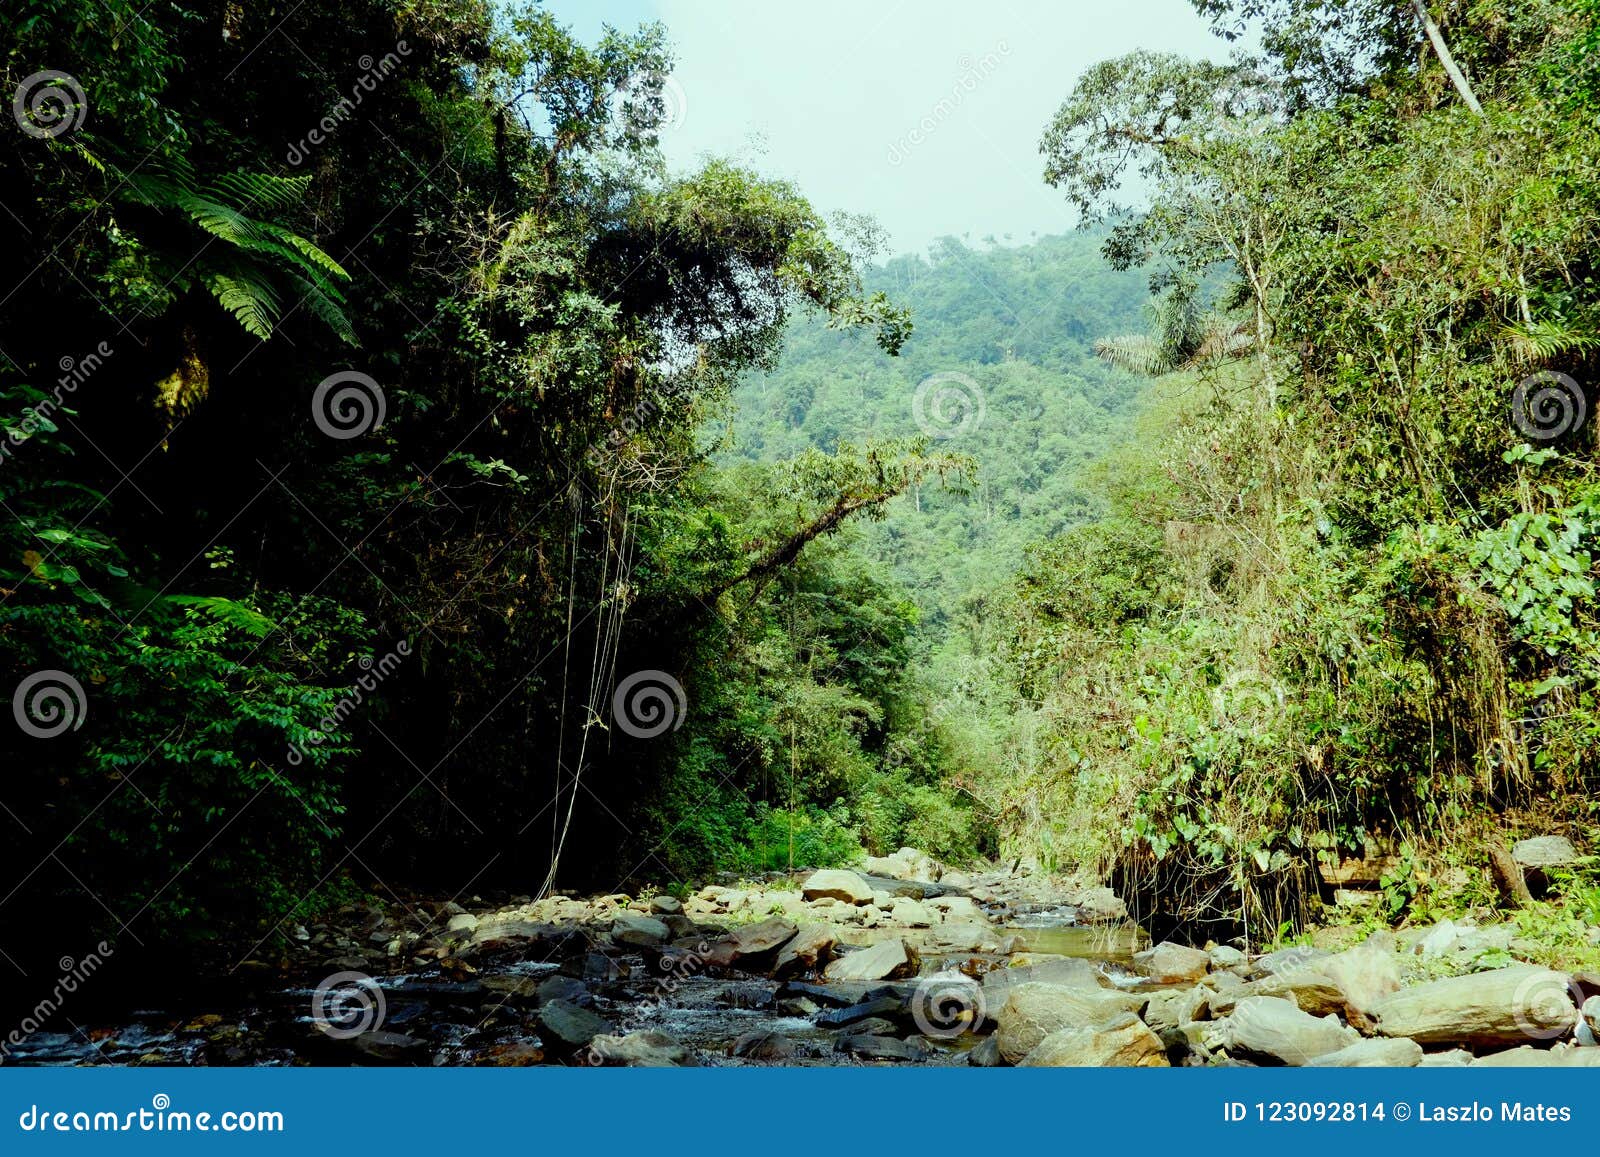 small stream of water flowing around rocks inside the jungle terrain